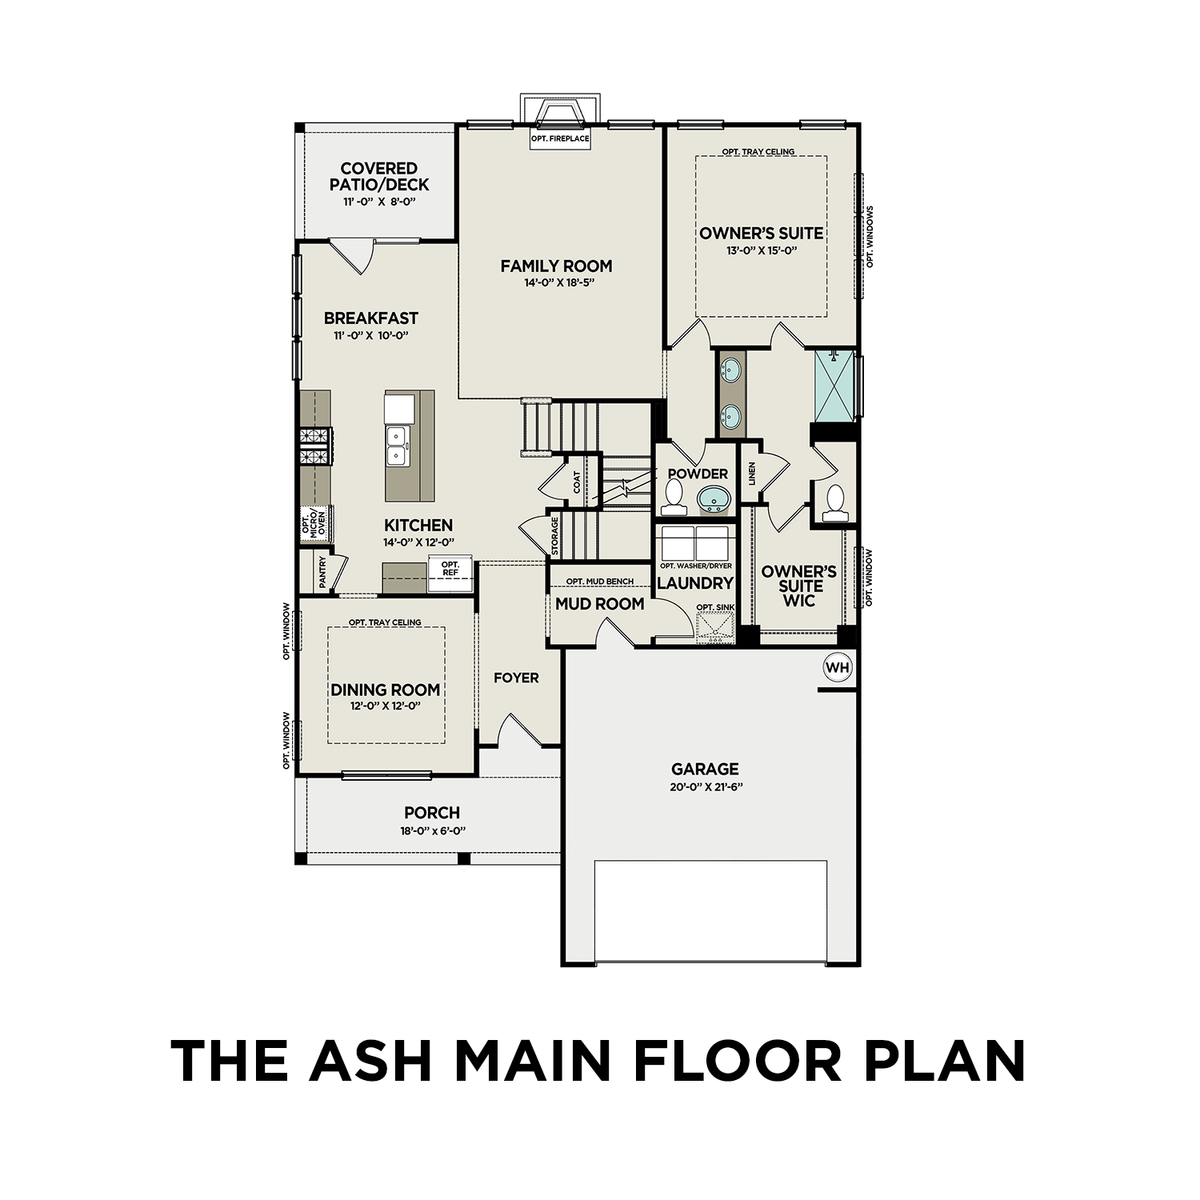 1 - The Ash A floor plan layout for 467 Black Walnut Drive in Davidson Homes' Carellton community.